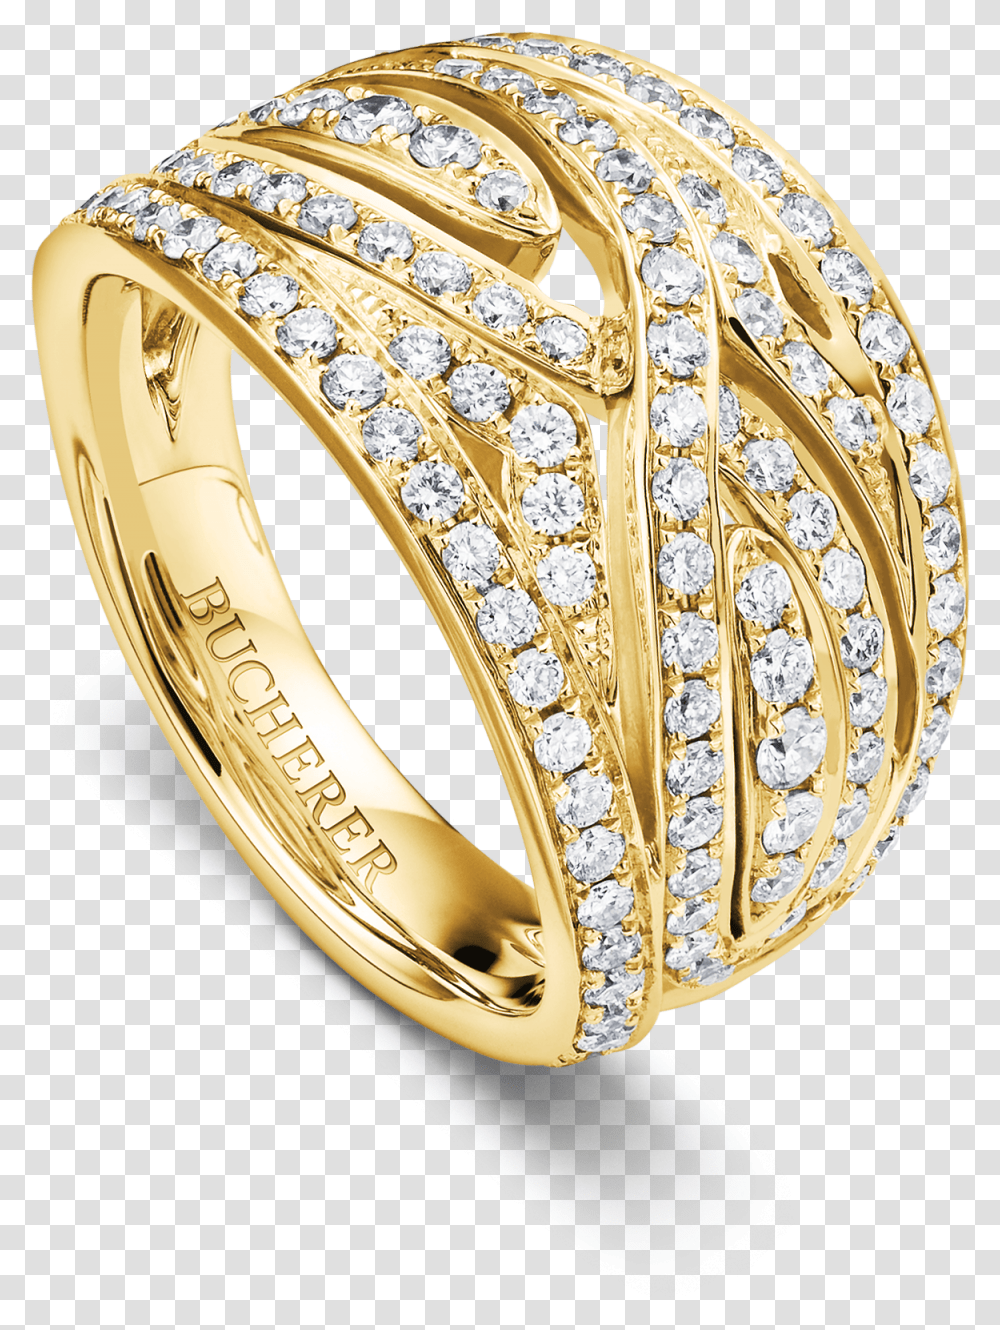 Bangle, Gold, Ring, Jewelry, Accessories Transparent Png